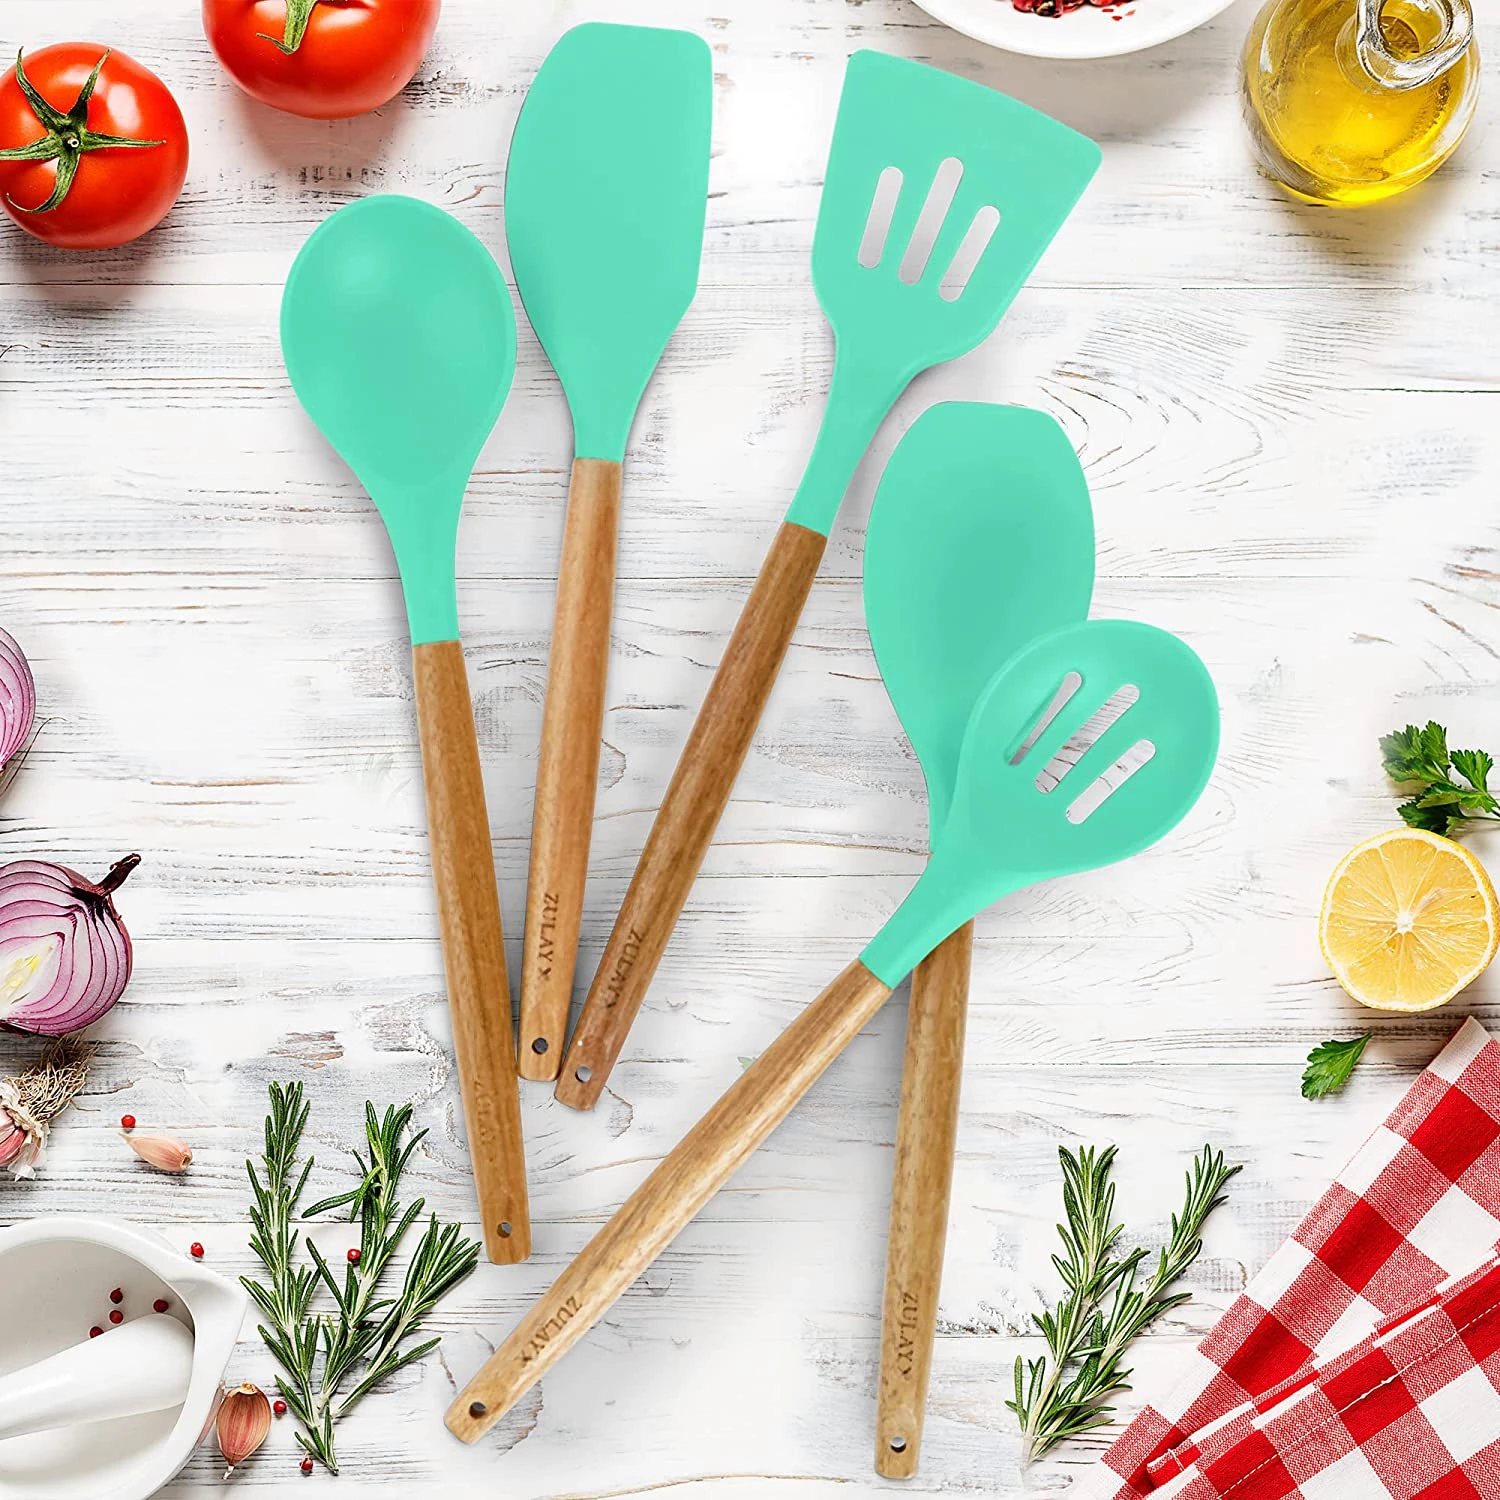 Non-Stick Silicone Cooking Utensils Set with Authentic Acacia Wood Handles